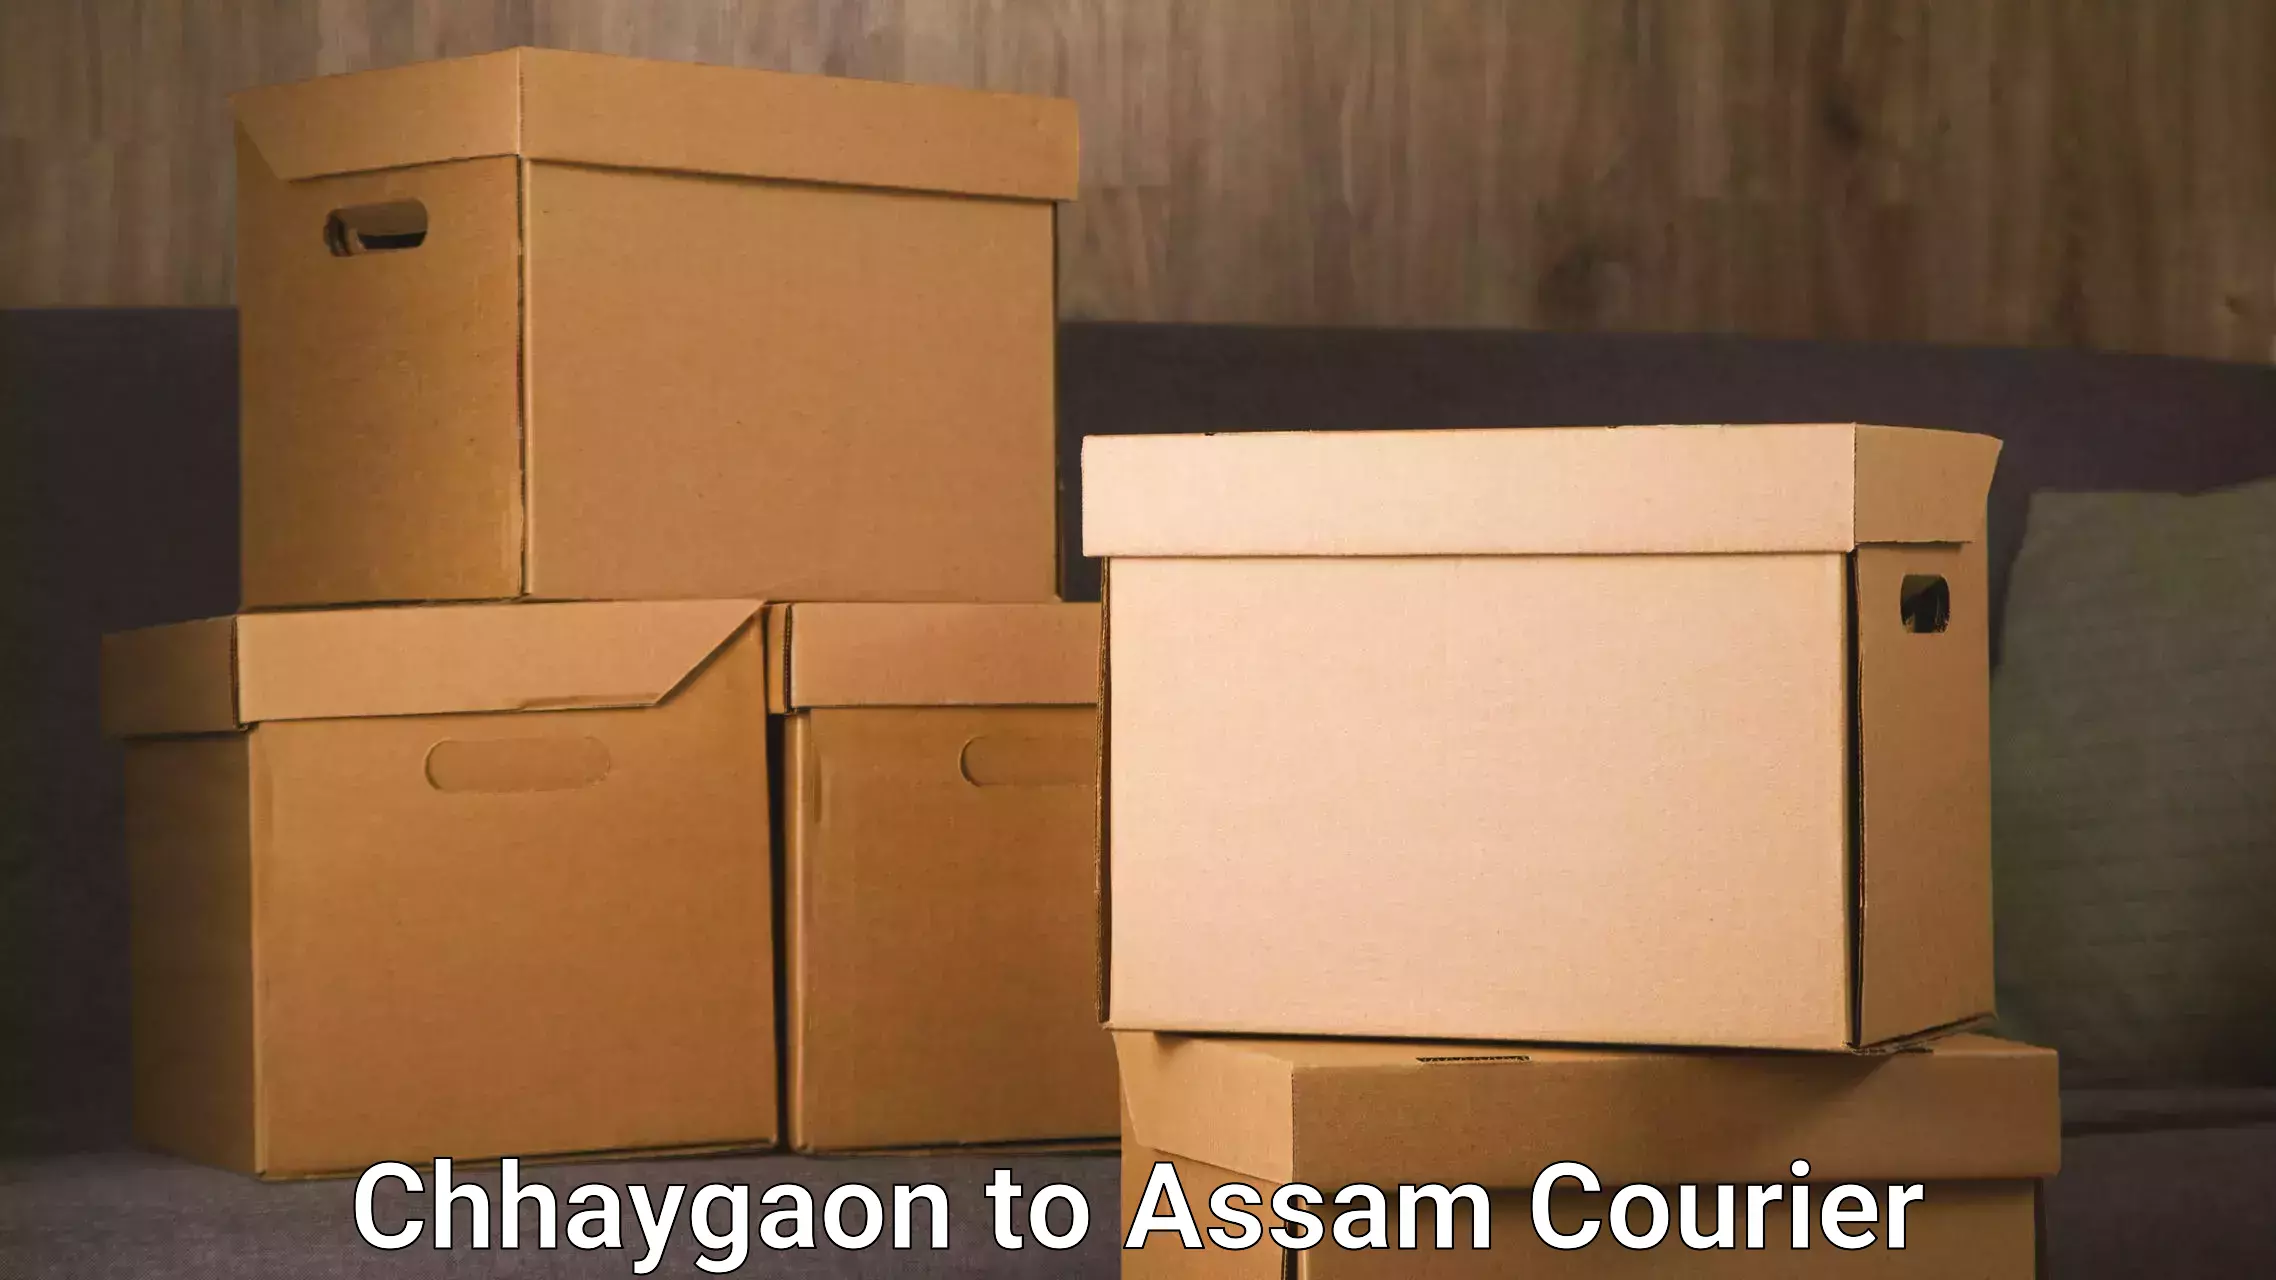 On-call courier service Chhaygaon to Tezpur University